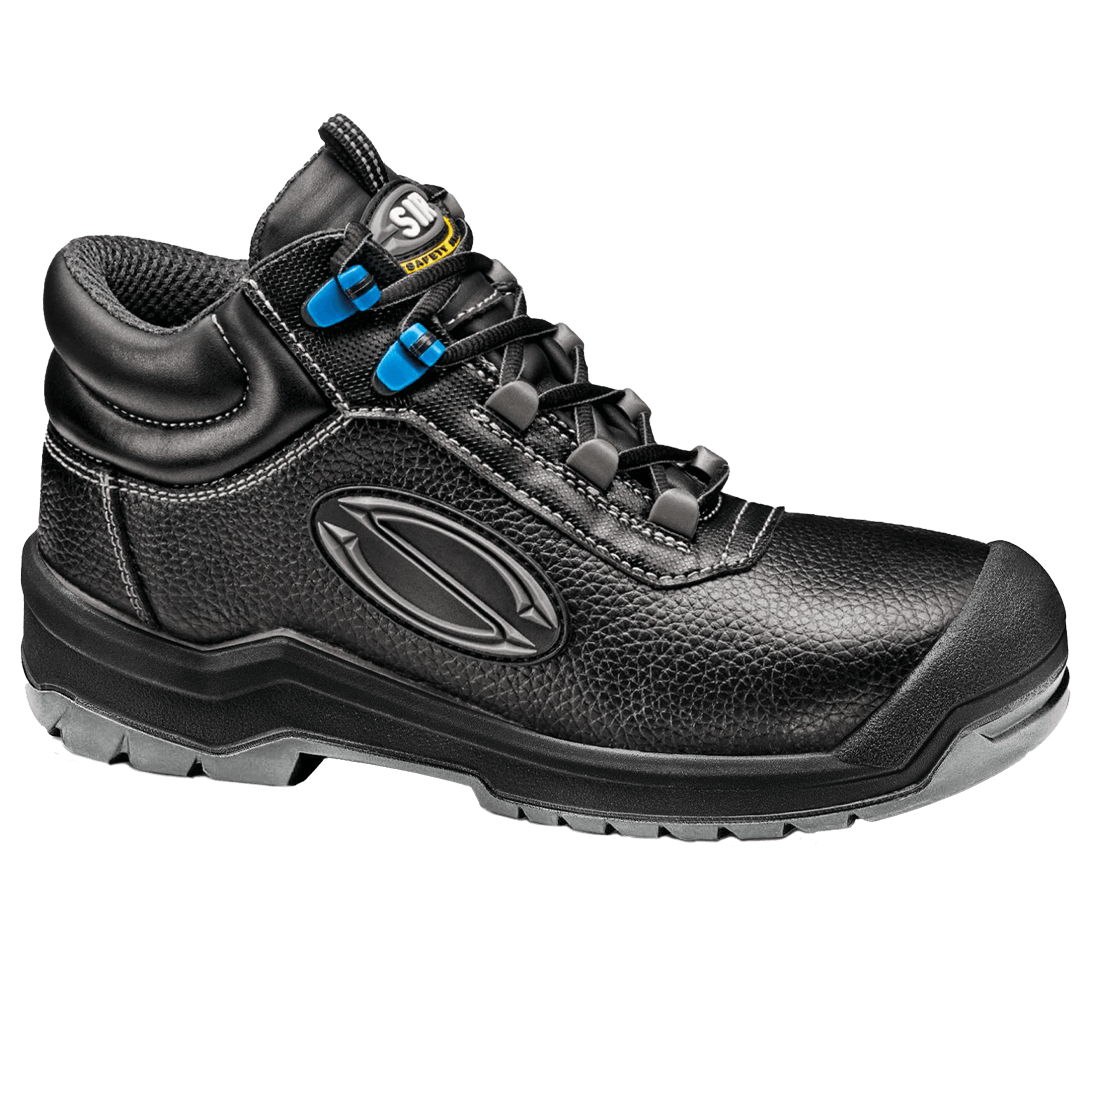 Chaussures de travail Sir Safety System